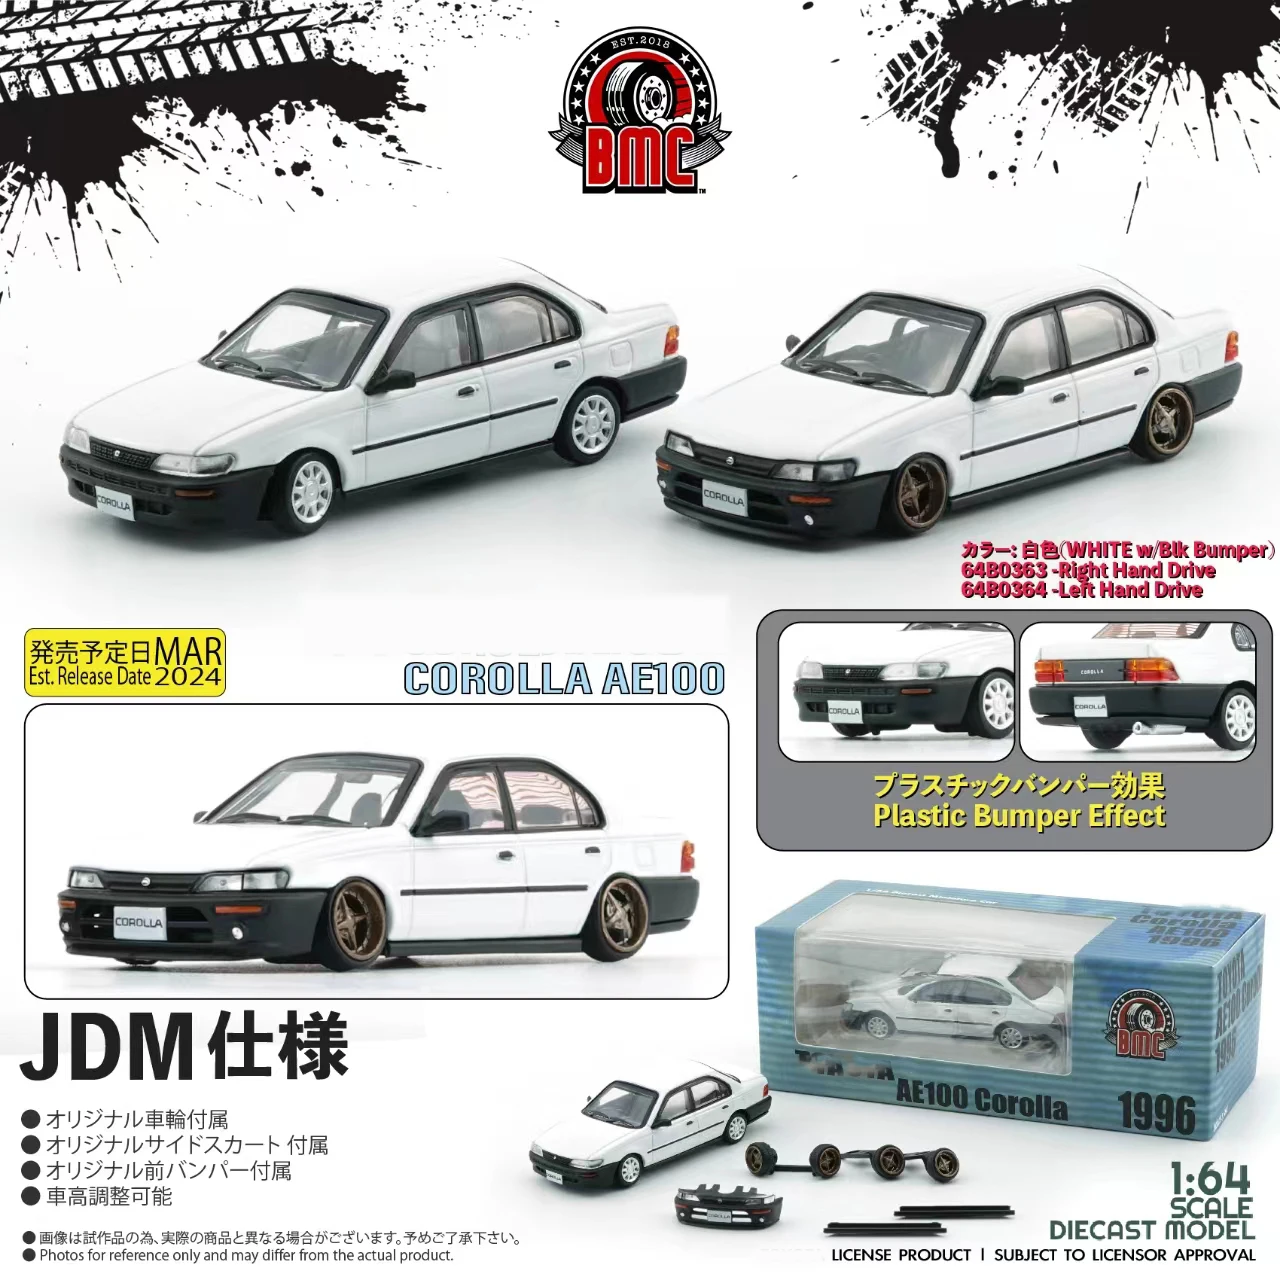 

New BMC 1:64 Corolla AE100 1996 Grey Diecast Alloy Toy Cars Simulation Model By BM Creations For Collection gift